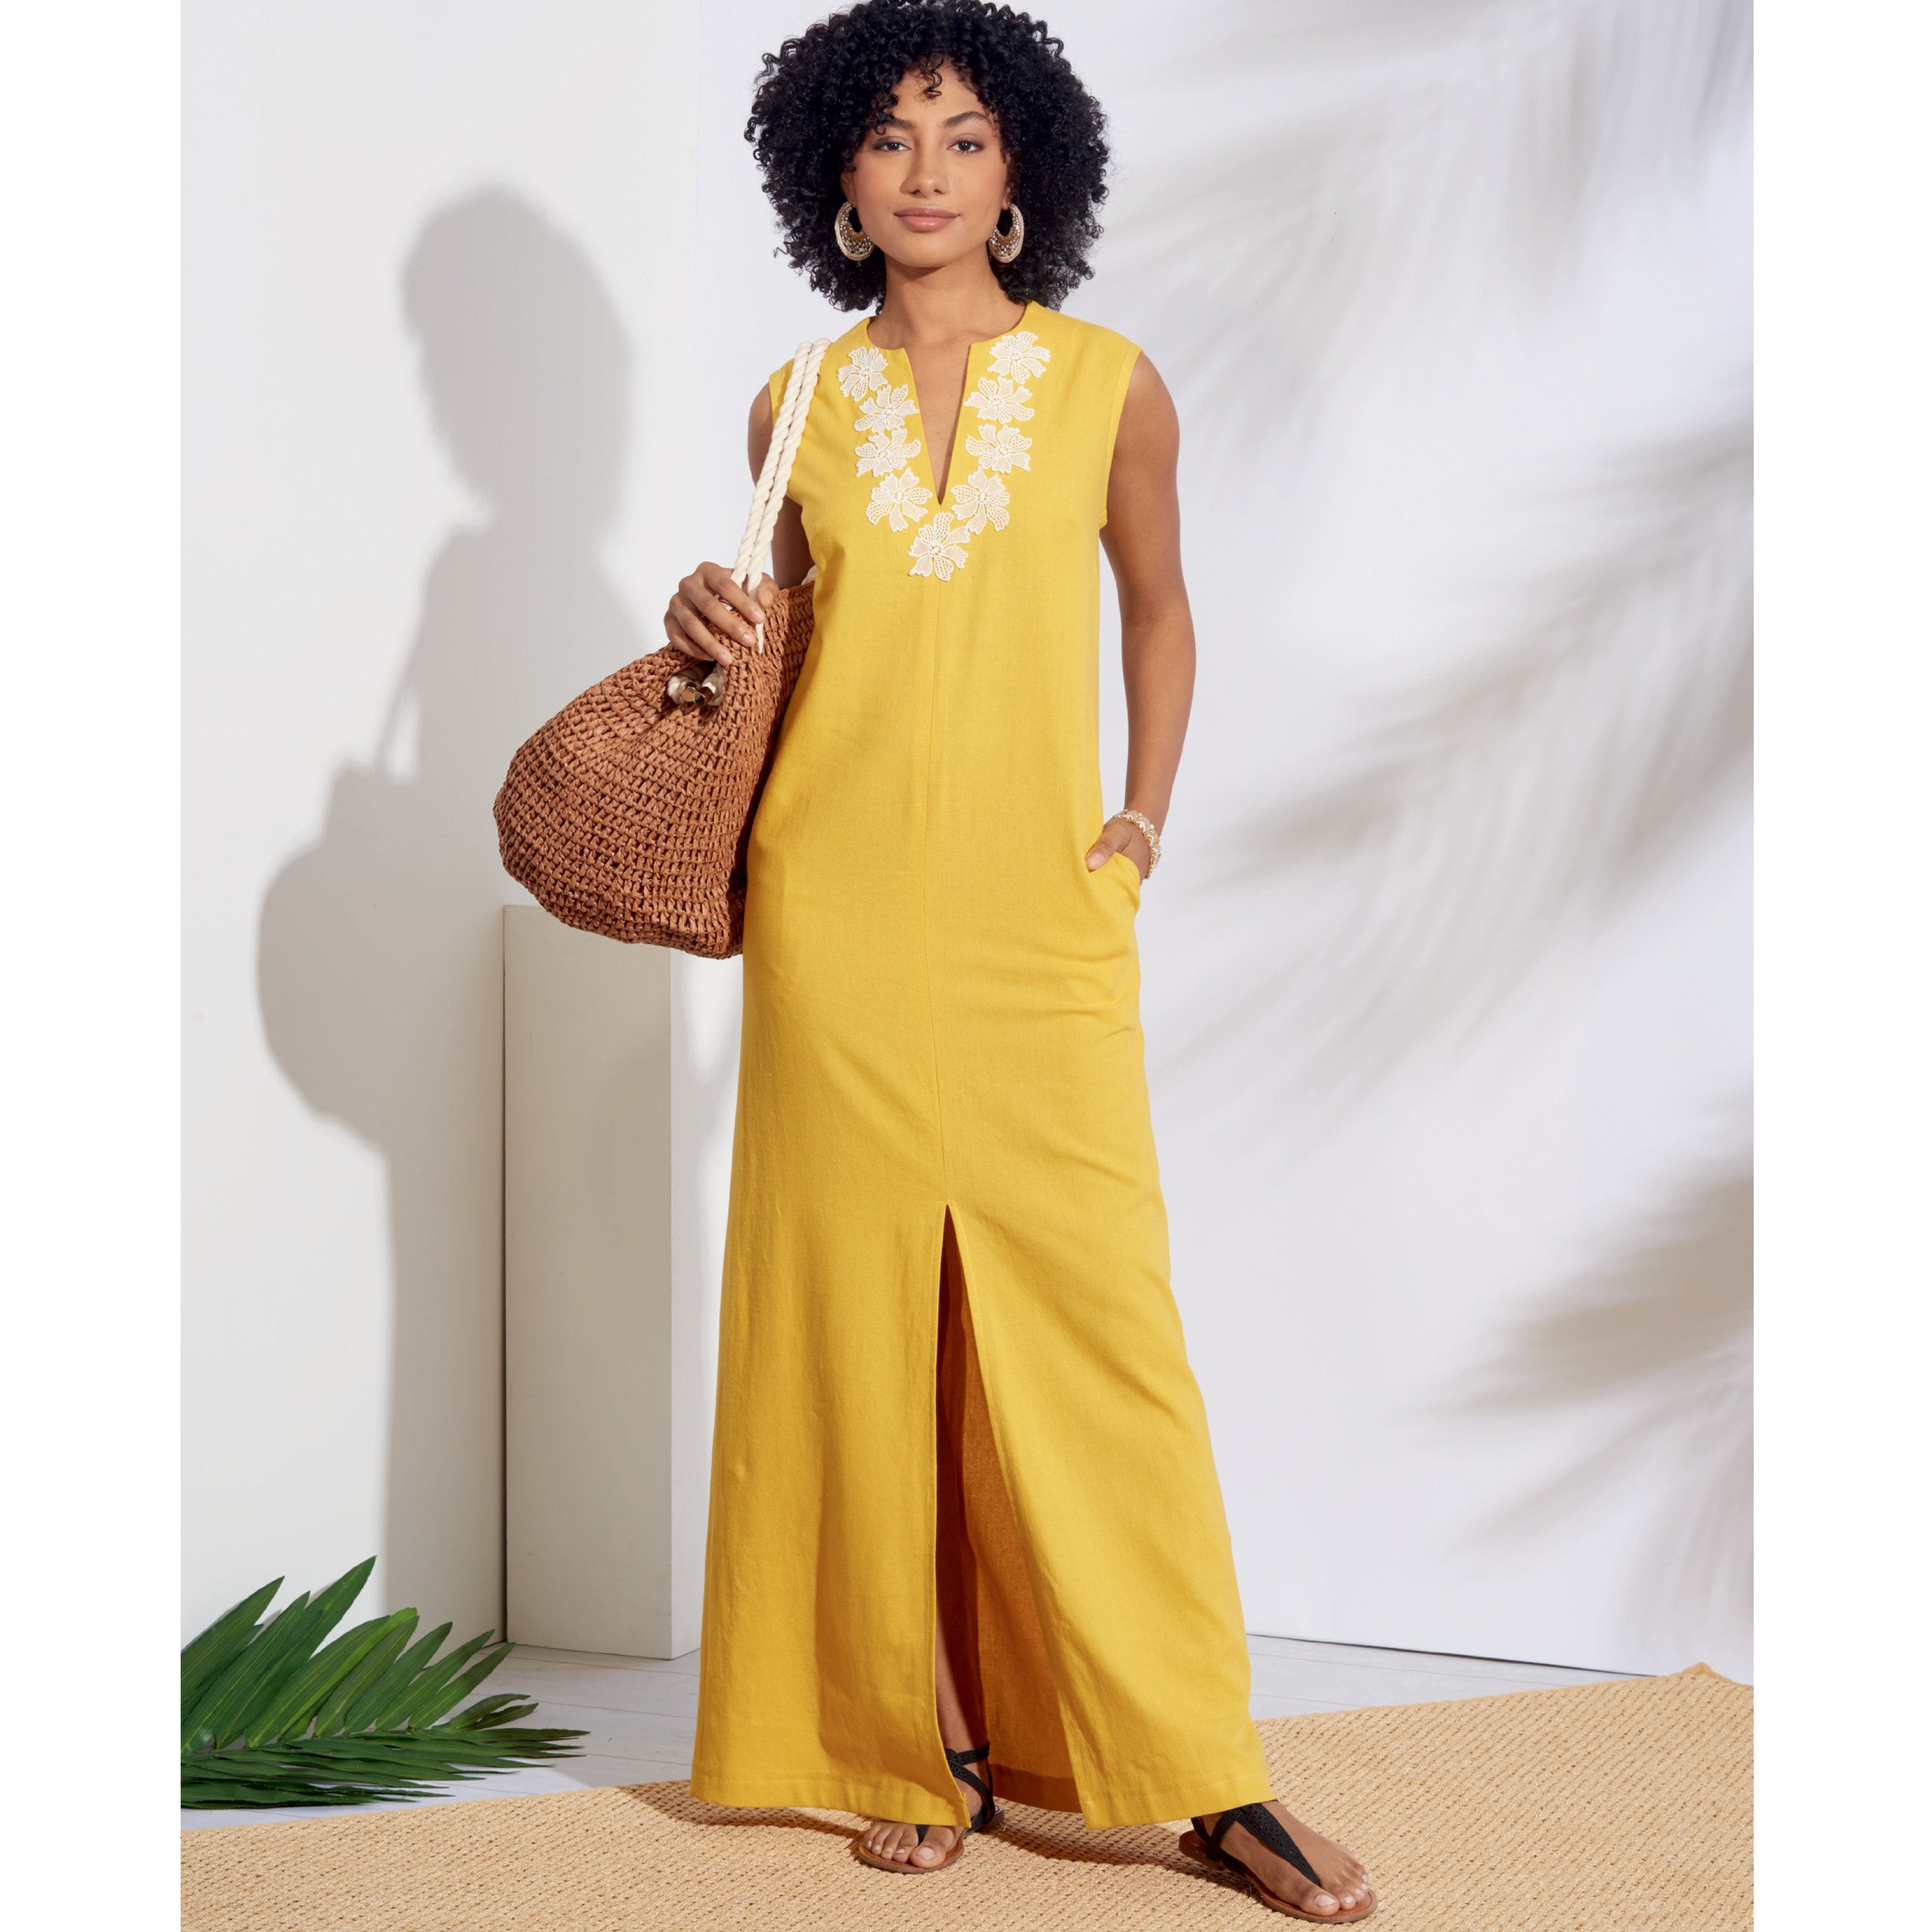 Simplicity Pattern 8912 Missesâ€™ slip-on maxi or short dresse from Jaycotts Sewing Supplies